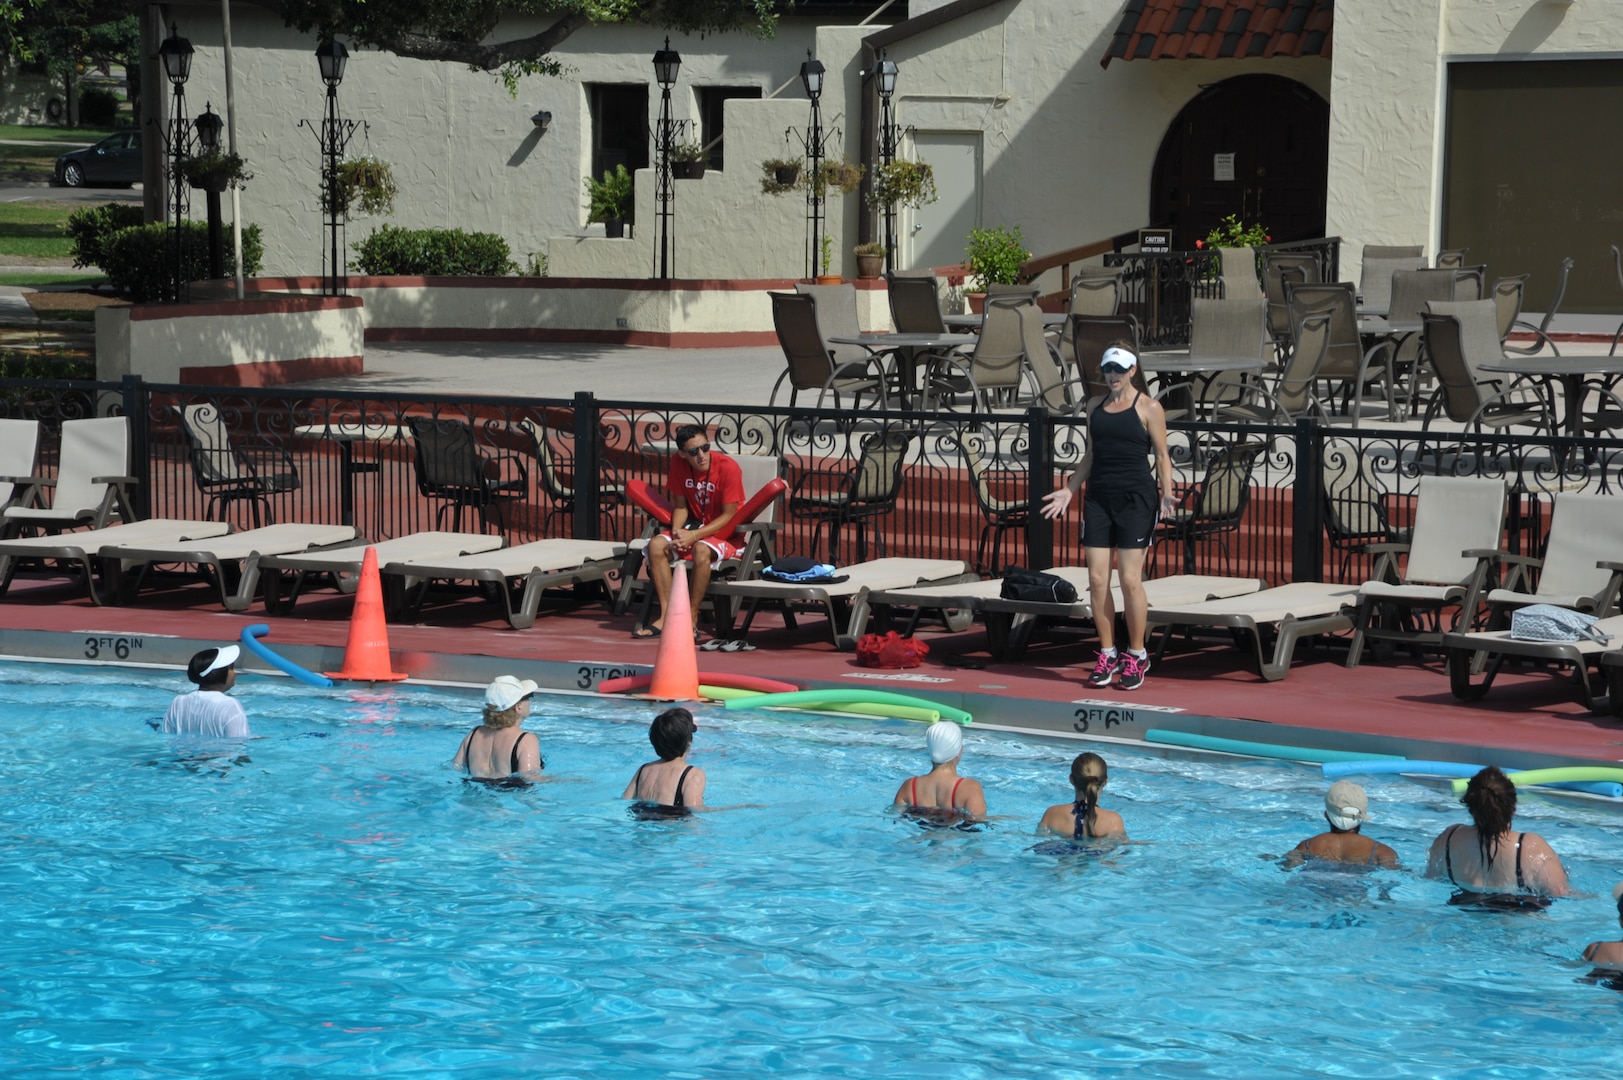 Water aerobics students at the Joint Base San Antonio-Randolph Center Pool follow along with the exercises taught by Lisa Glanzer, substitute instructor, June 20. (U.S. Air Force photo by Airman 1st Class Lincoln Korver)